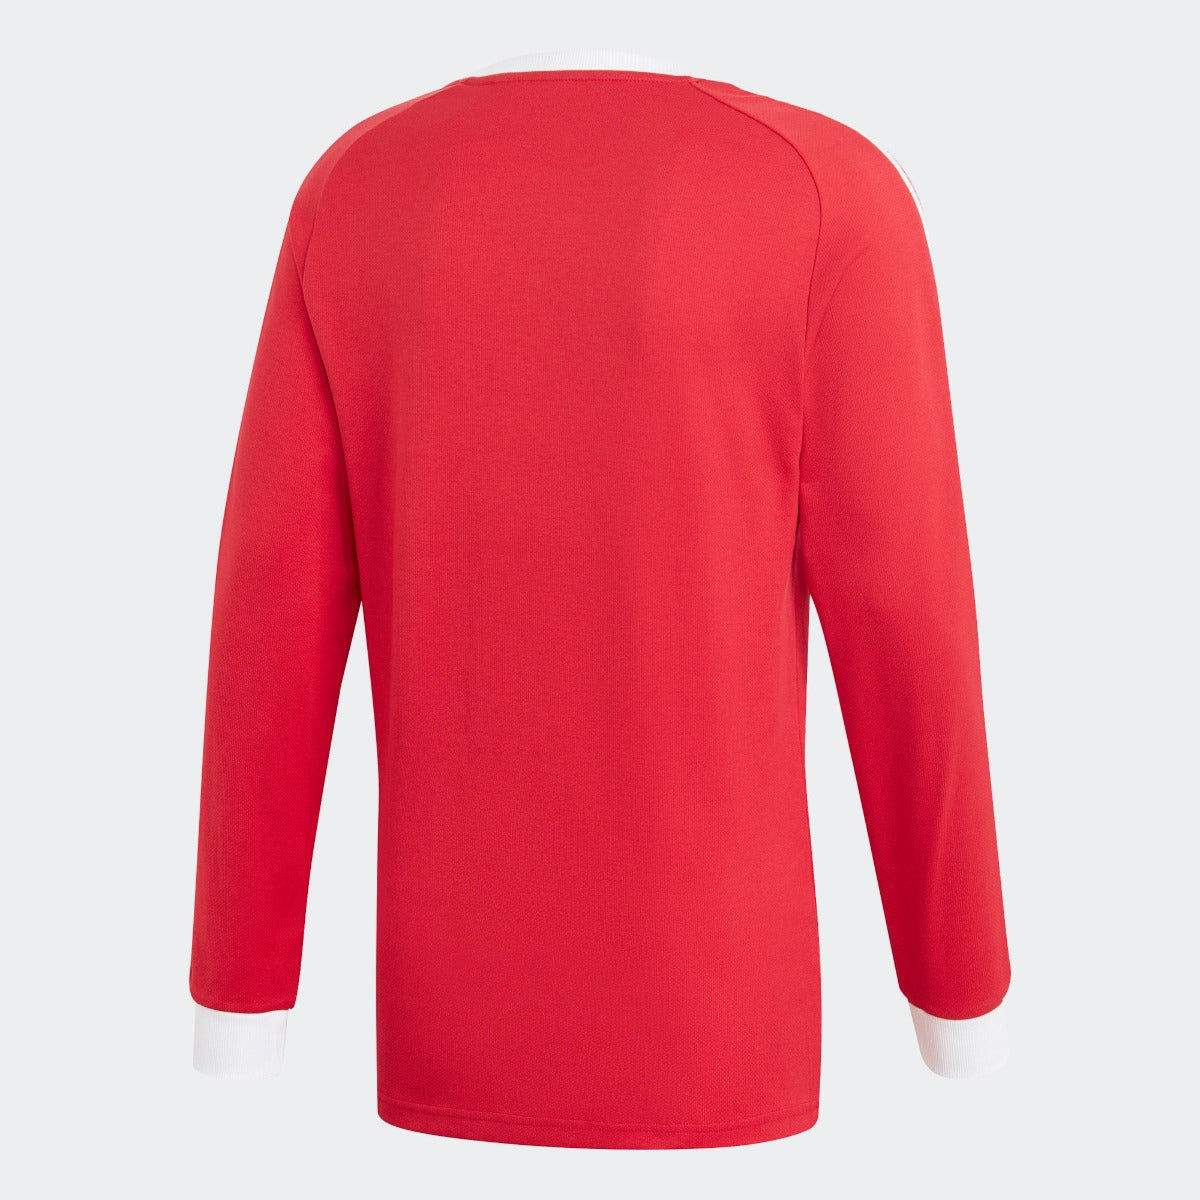 Adidas 2020-21 Manchester United Icons Long-Sleeve Tee - Red-White